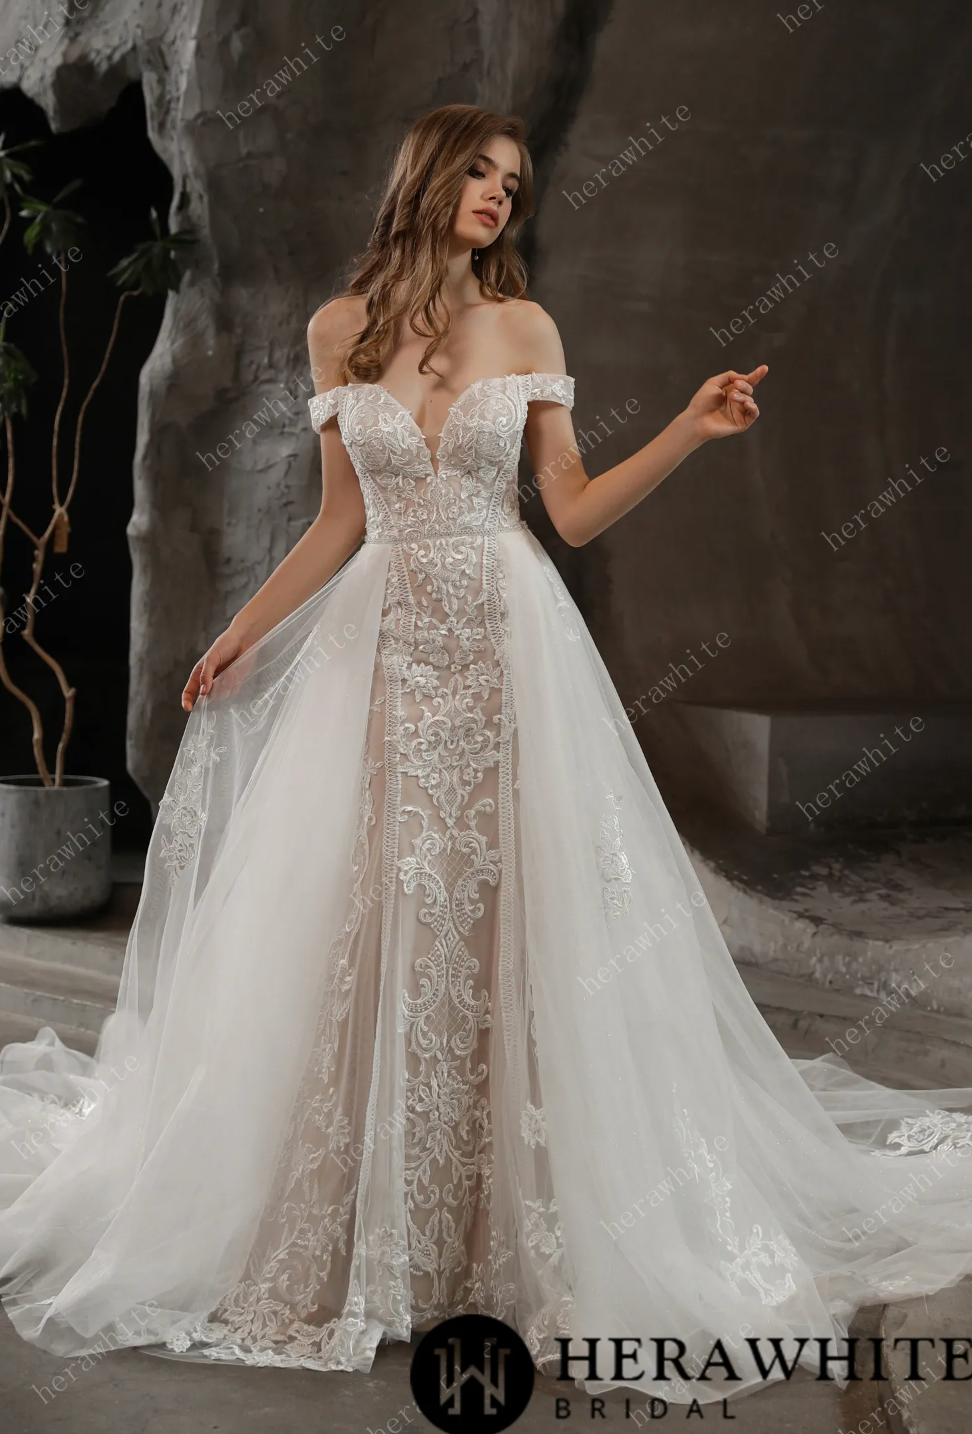 Load image into Gallery viewer, Gorgeous Lace Fit and Flare Bridal Gown with Detachable Train
